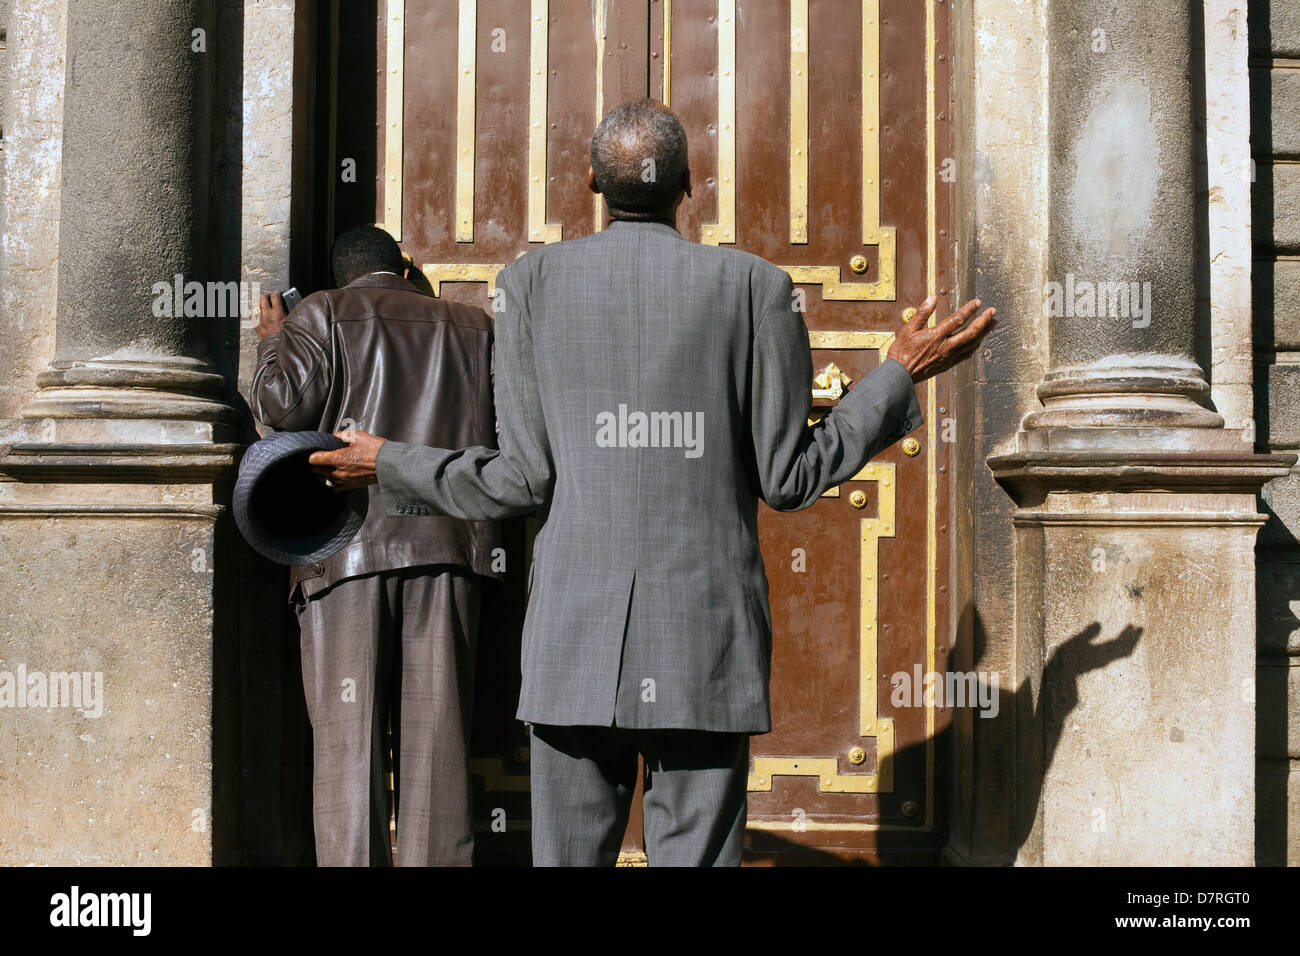 Men worshipping outside St George's Cathedral in Addis Ababa, Ethiopia Stock Photo